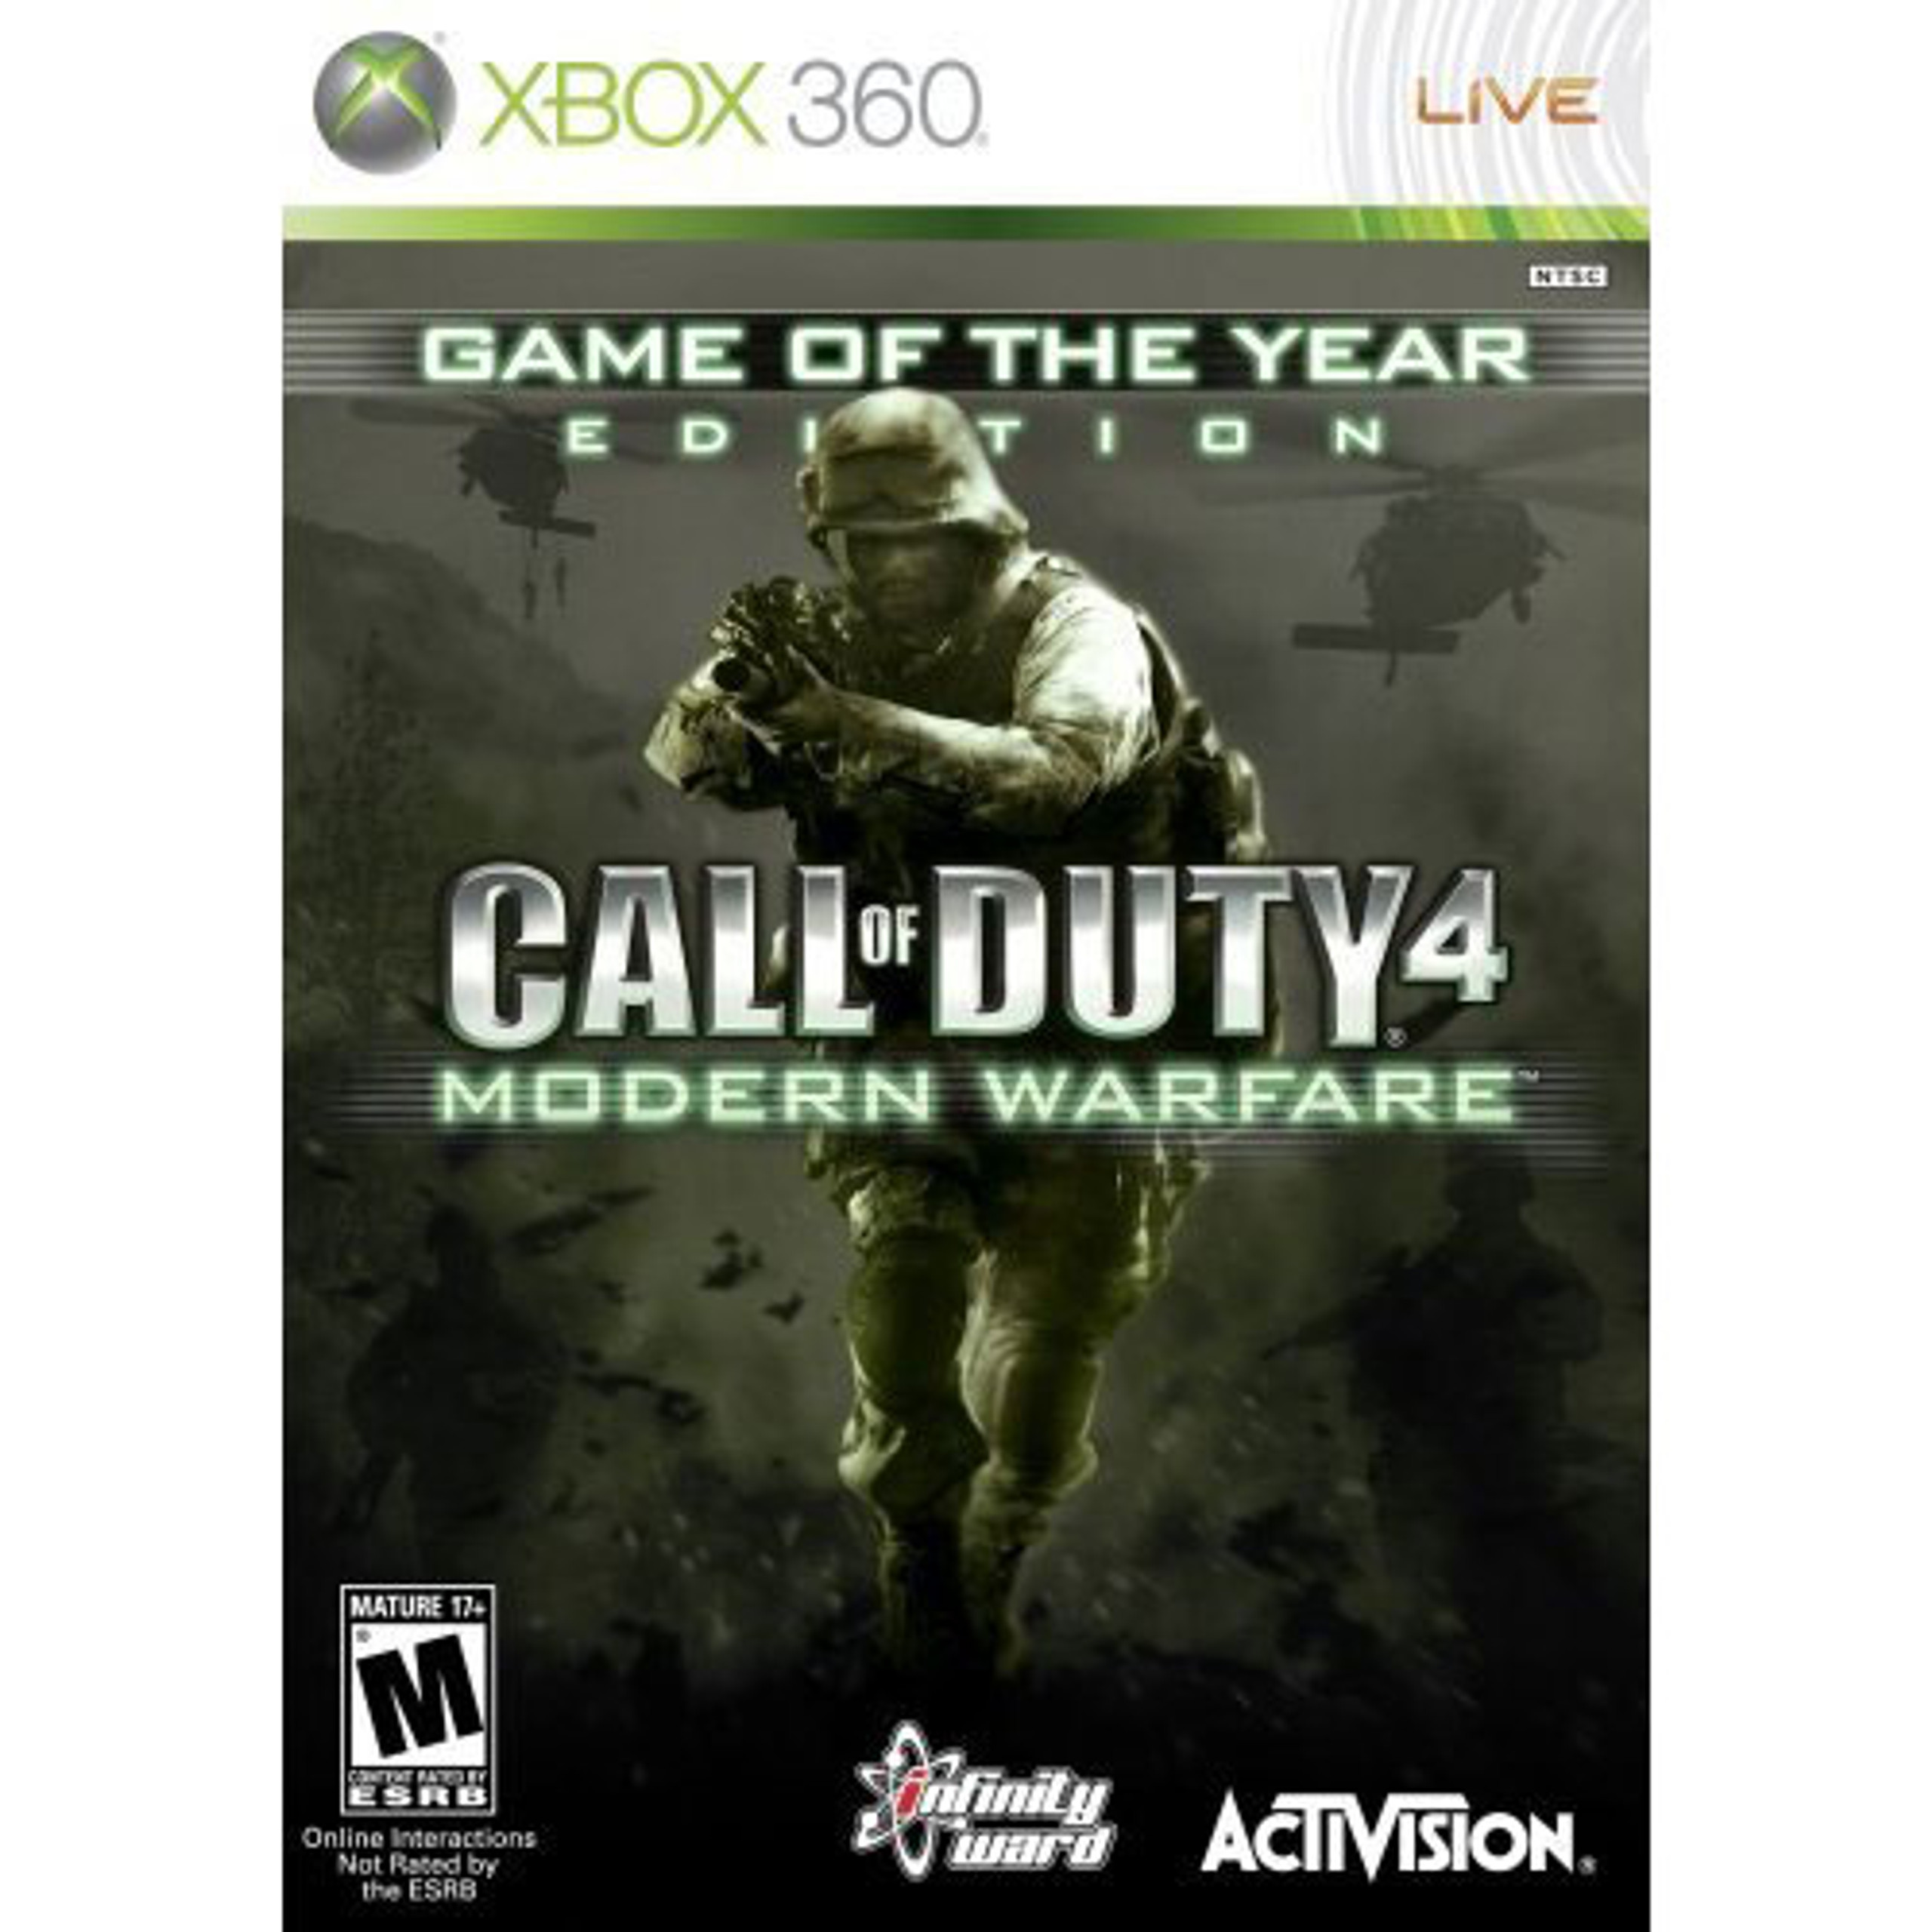 call-of-duty-4-modern-warfare-game-of-the-year-edition-xbox-360